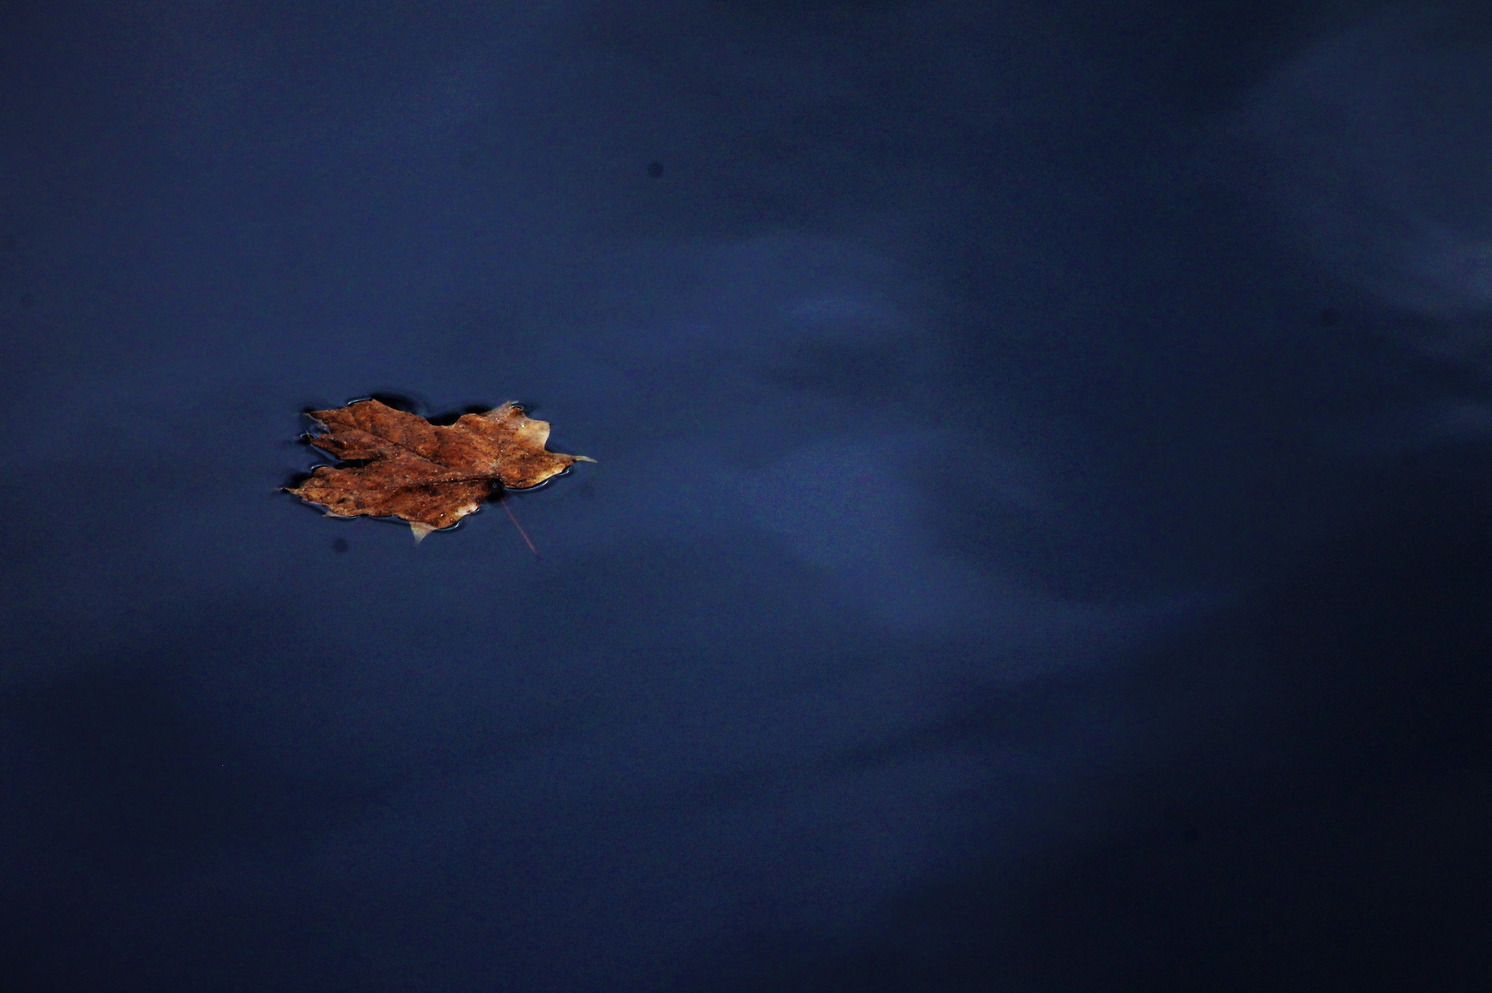 A single fall leaf floating on water